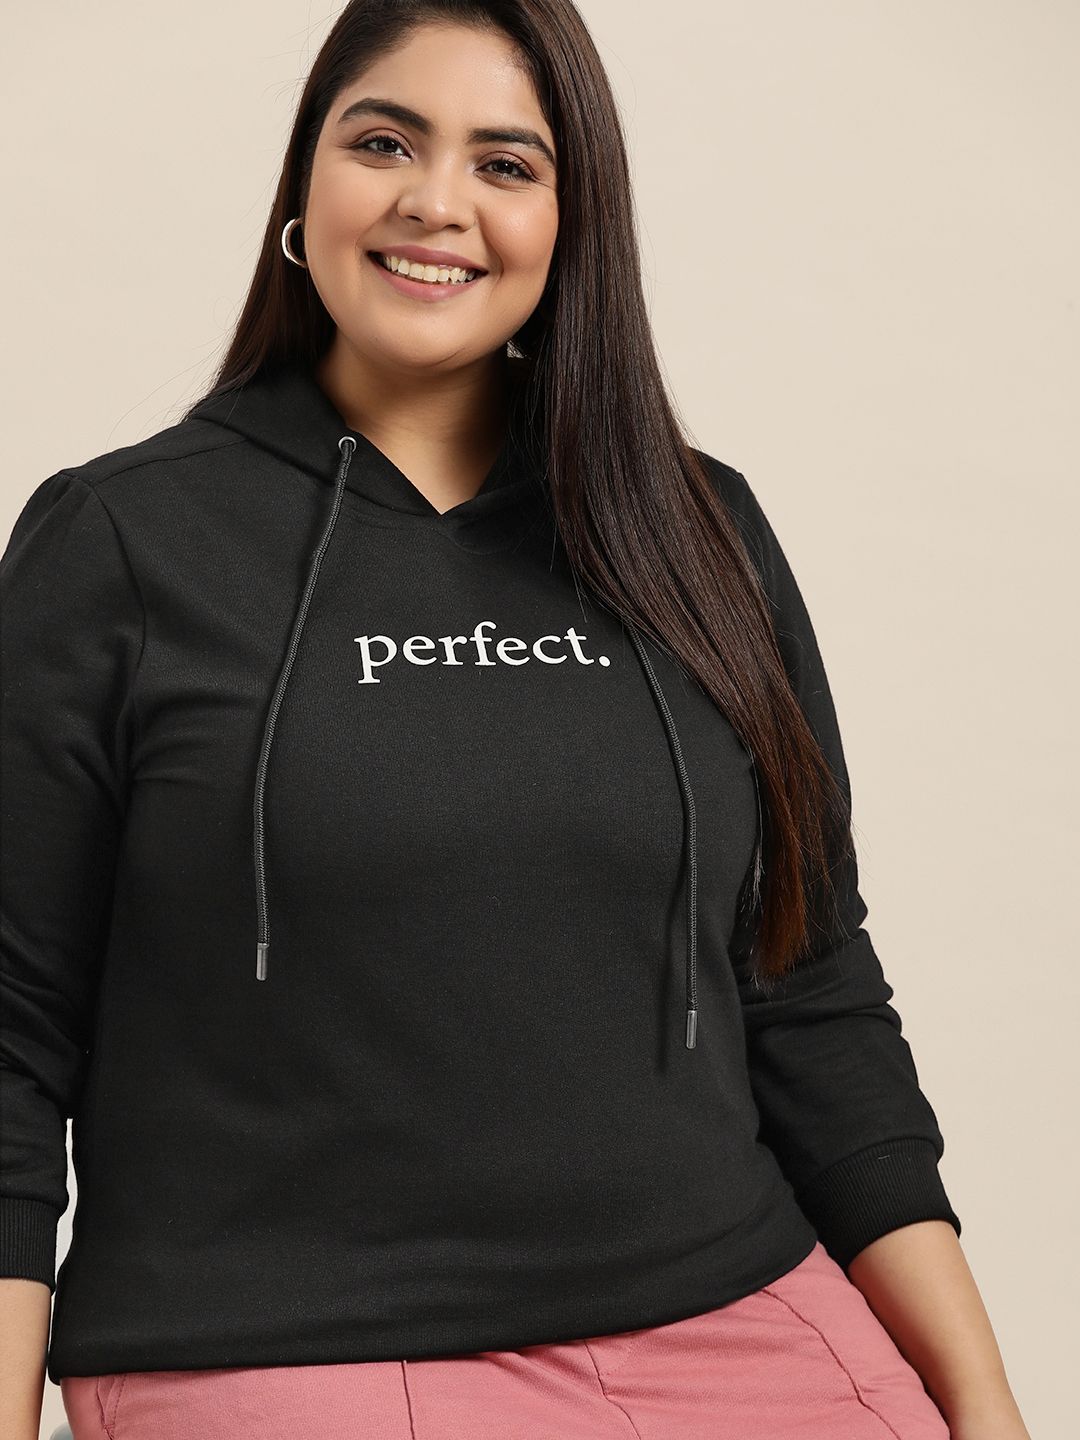 Sztori Plus Size Women Black Solid Hooded Sweatshirt with Printed Detail Price in India